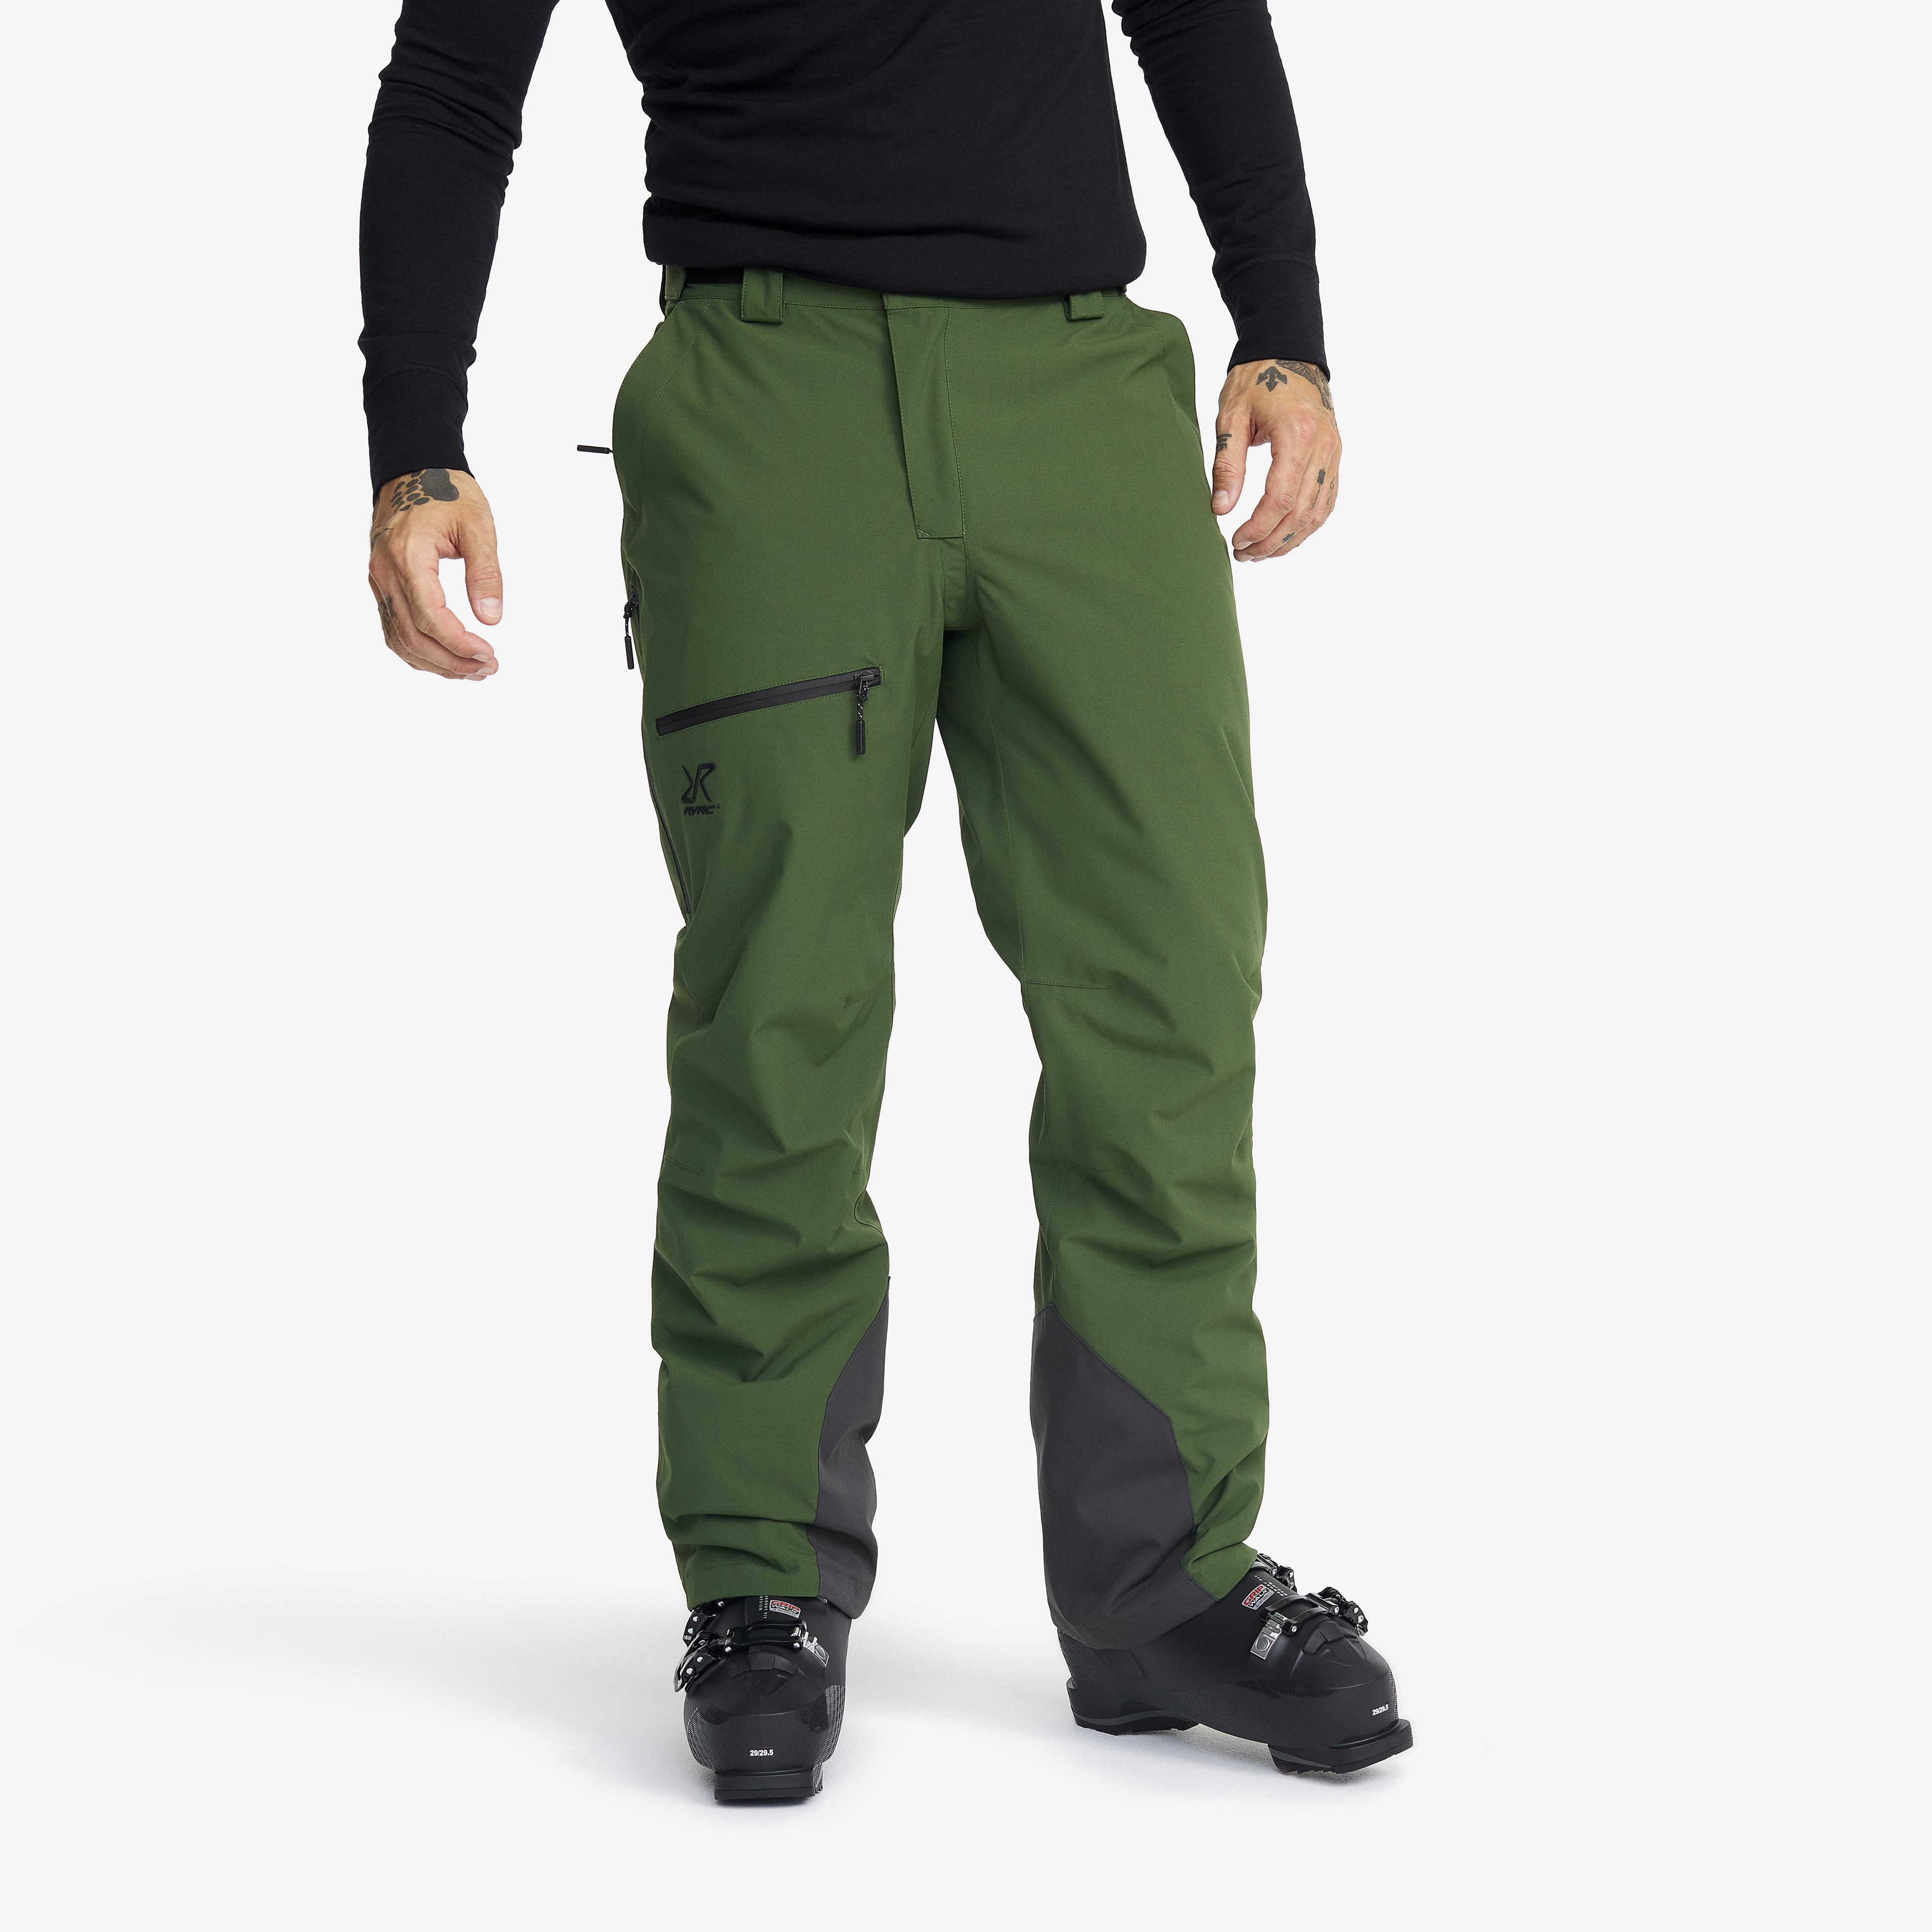 Halo 2L Insulated Snow Pants Black Forest Men